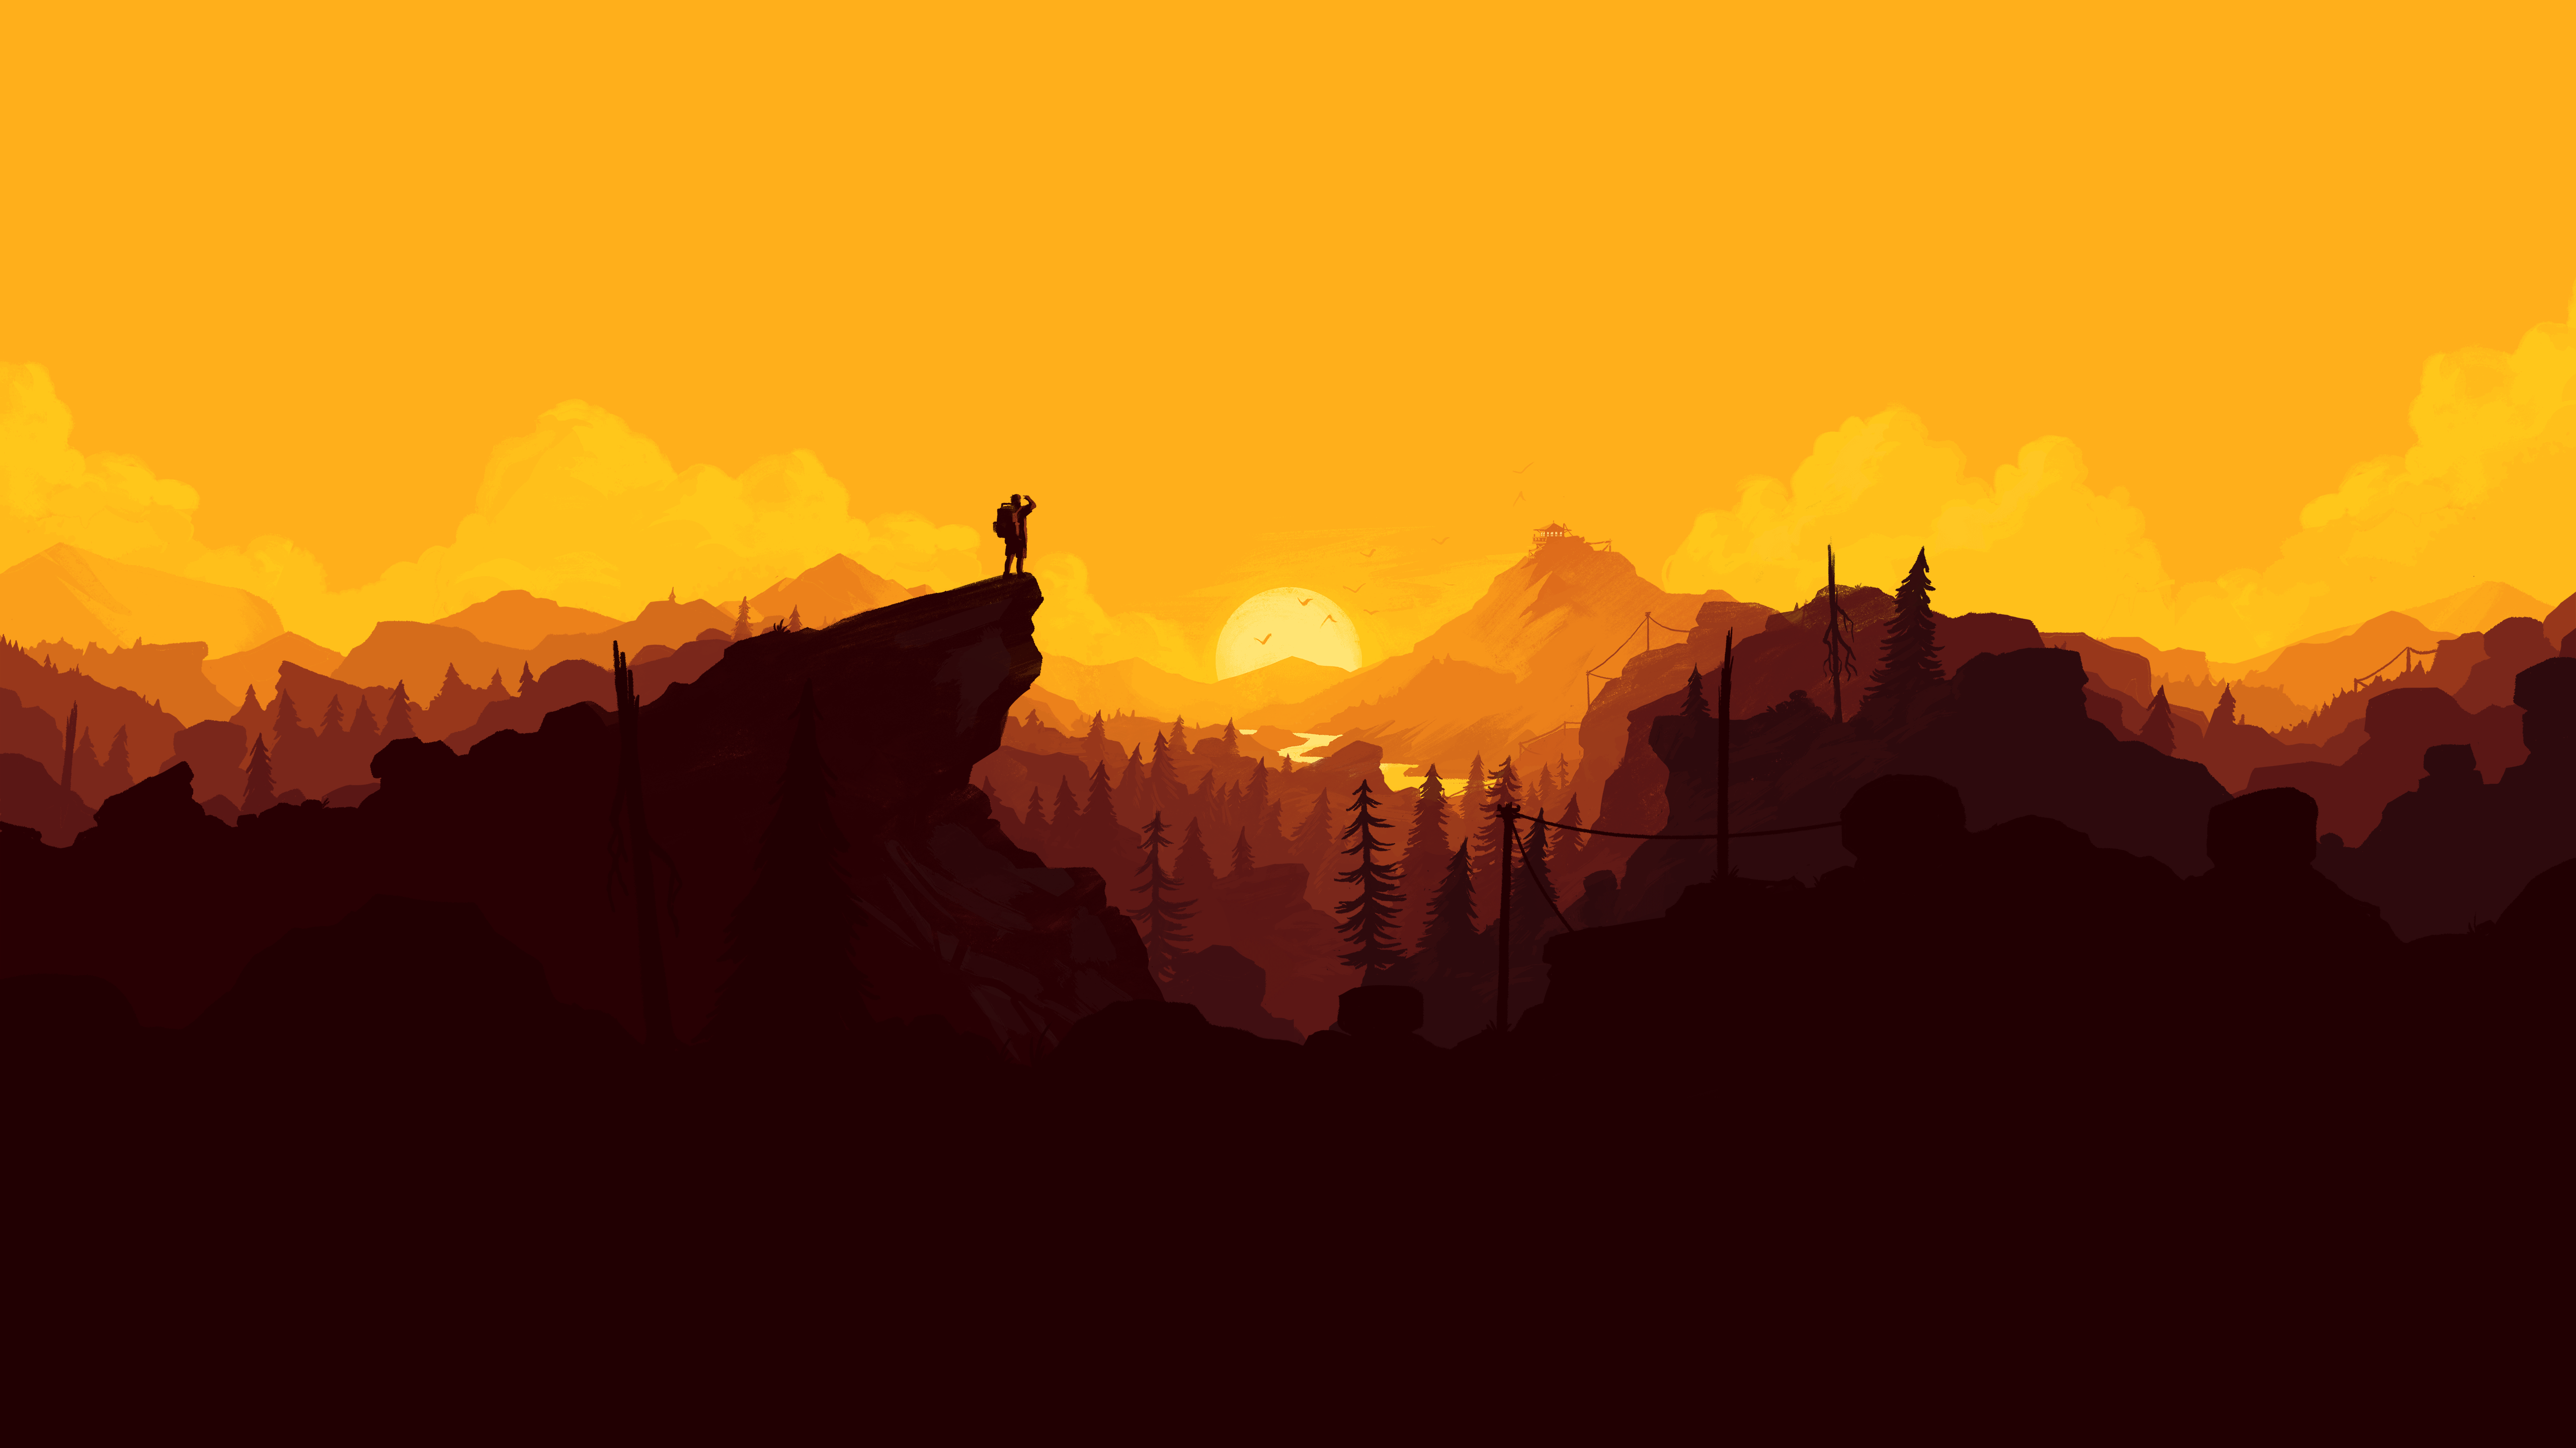 Firewatch HD Wallpaper And Background